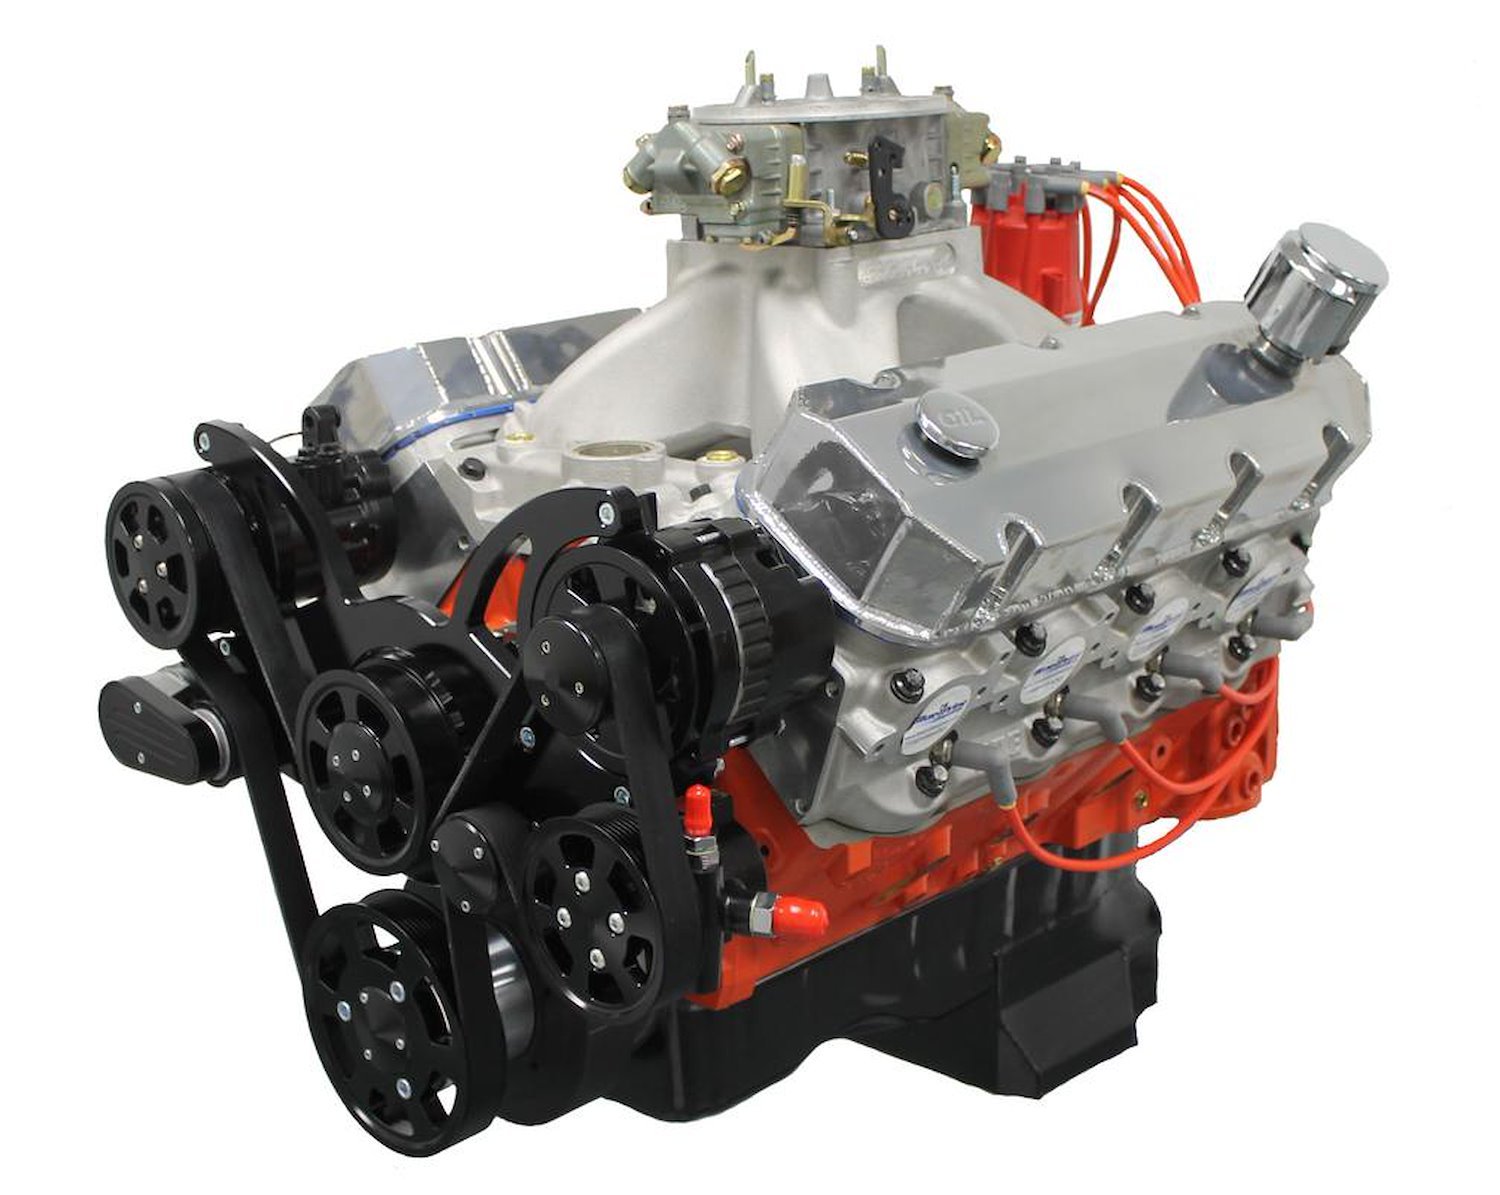 Pro Series Big Block Chevy 572 ci Drop-In Ready Crate Engine [750 HP | 690 ft.-lbs. of TQ]